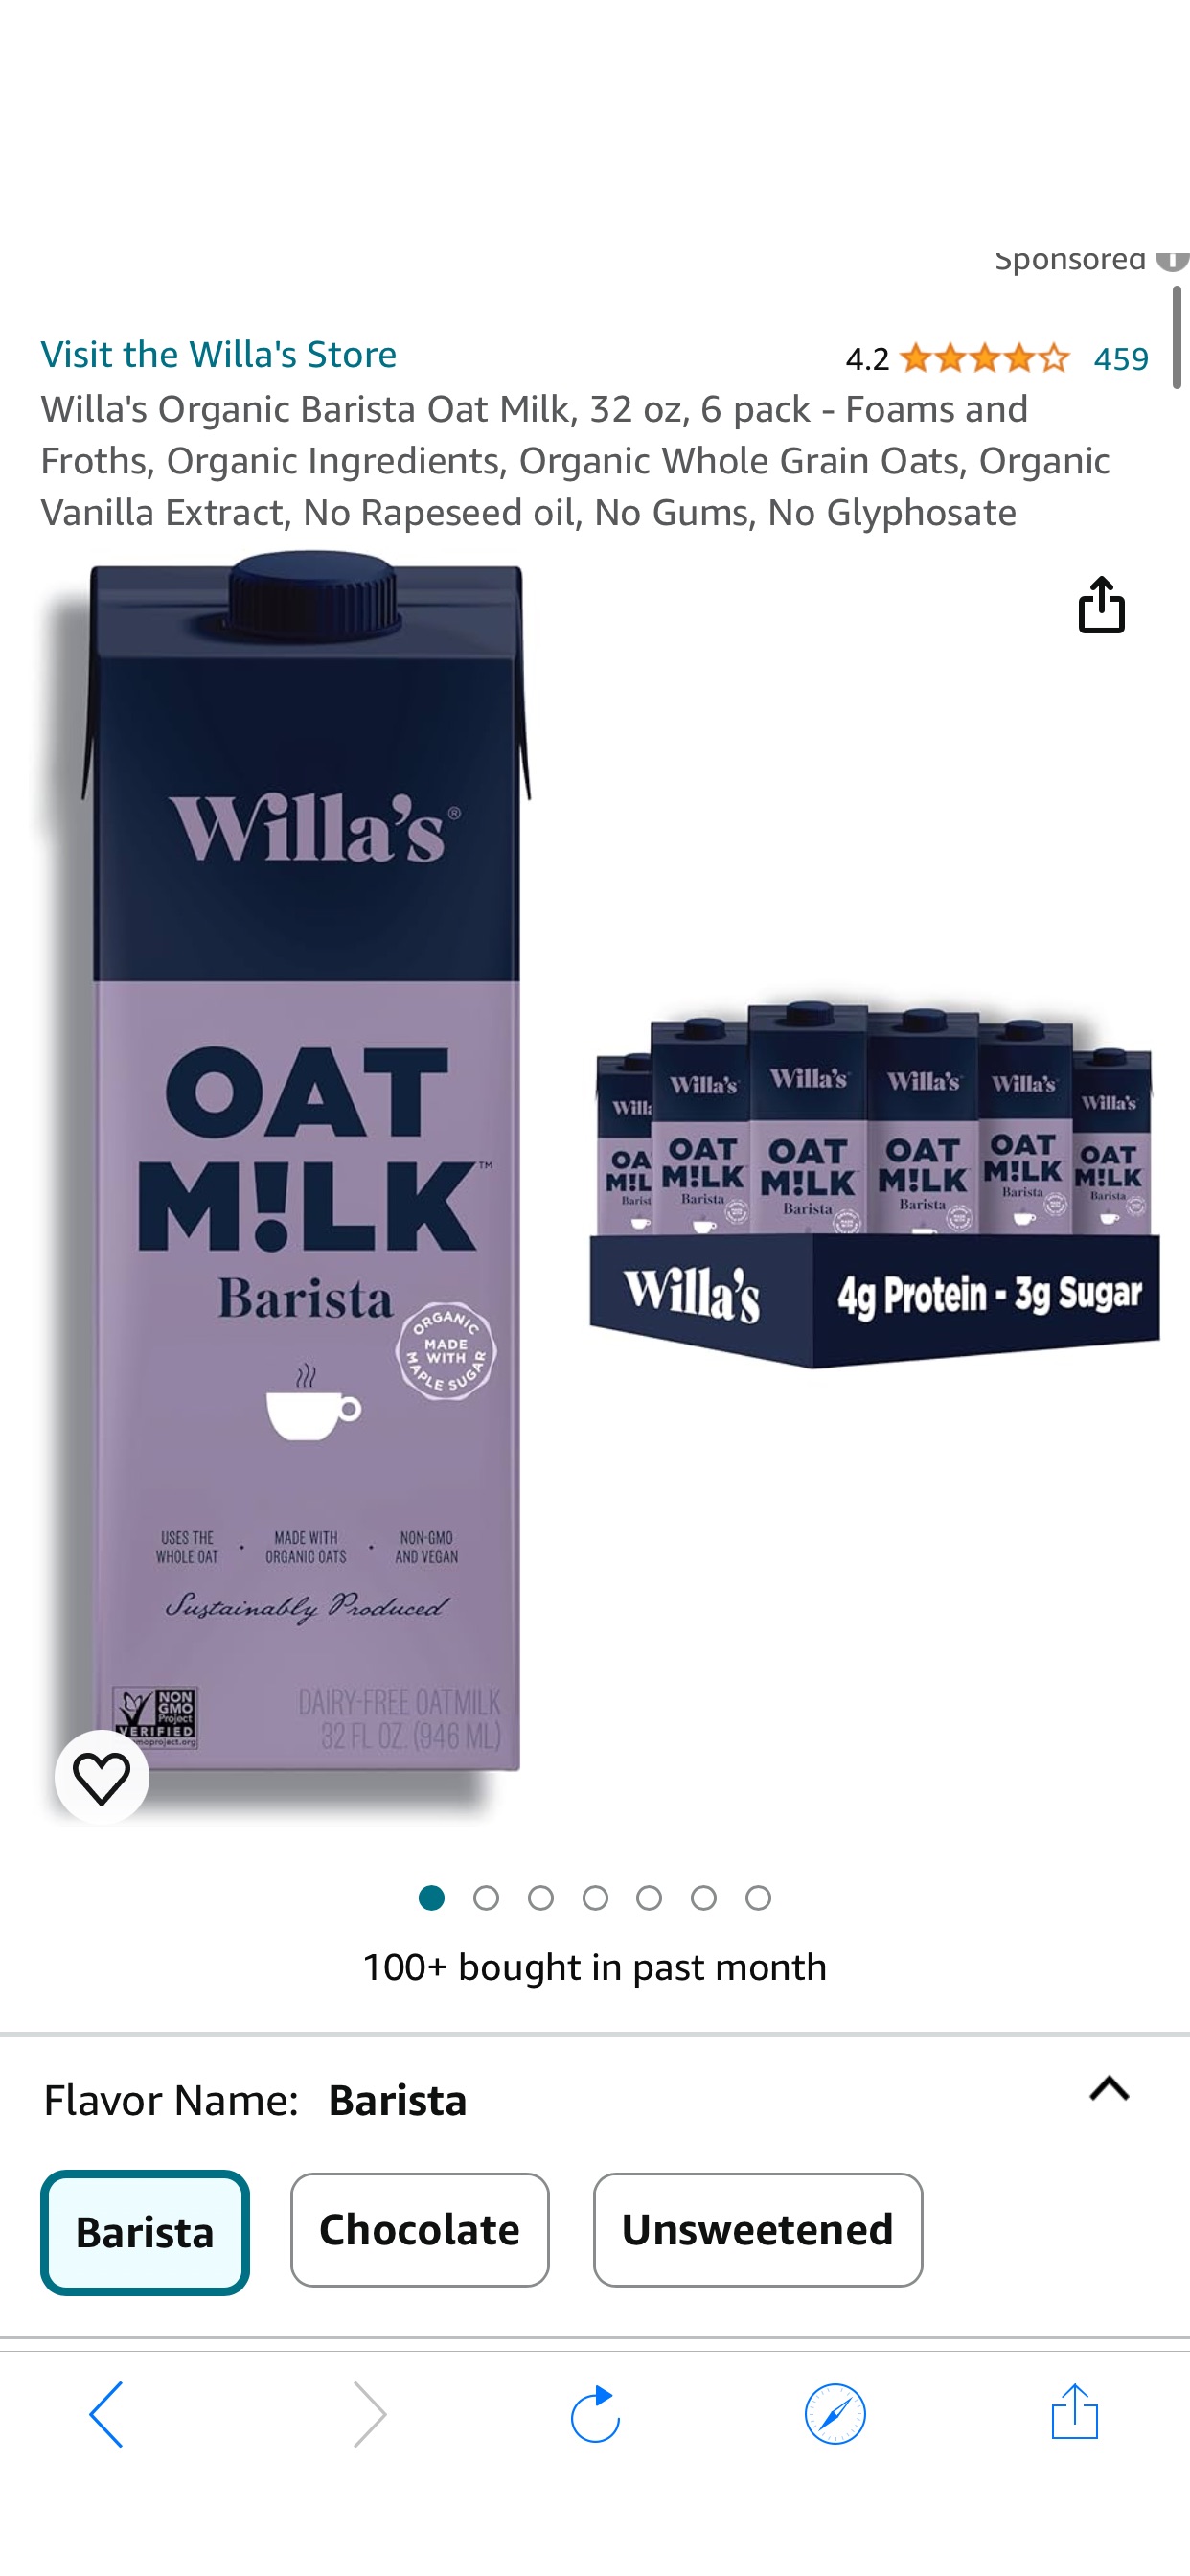 Amazon.com: Willa's Organic Barista Oat Milk, 32 oz, 6 pack - Foams and Froths, Organic Ingredients, Organic Whole Grain Oats, Organic Vanilla Extract, No Rapeseed oil, No Gums, No Glyphosate : Grocer